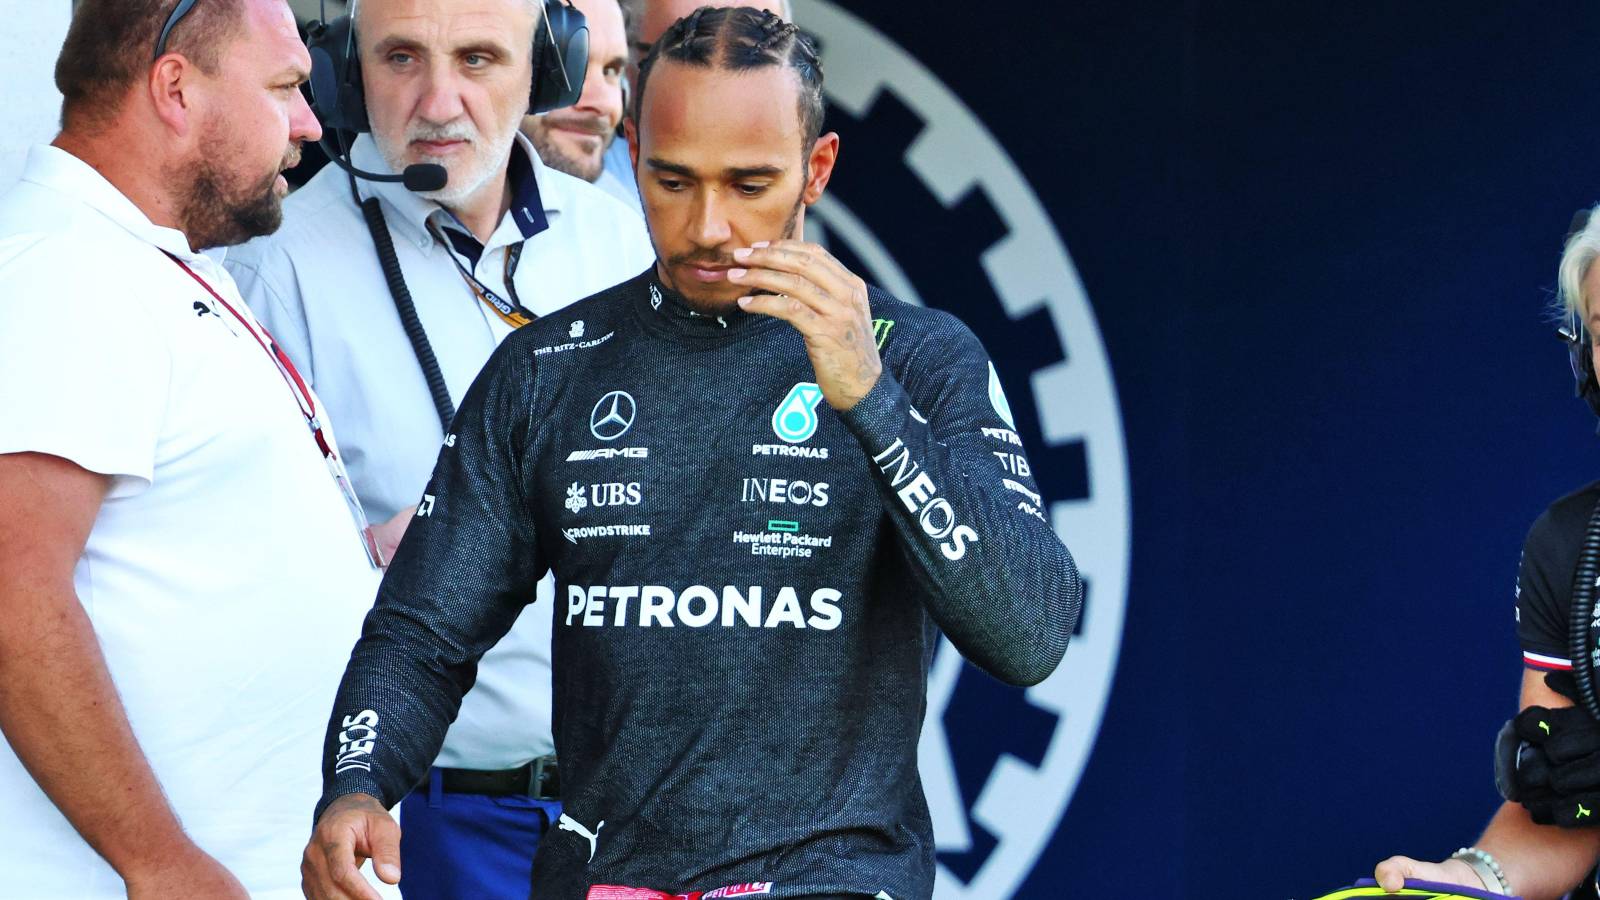 Lewis Hamilton, Mercedes, looks disappointed. Austria, July 2022.